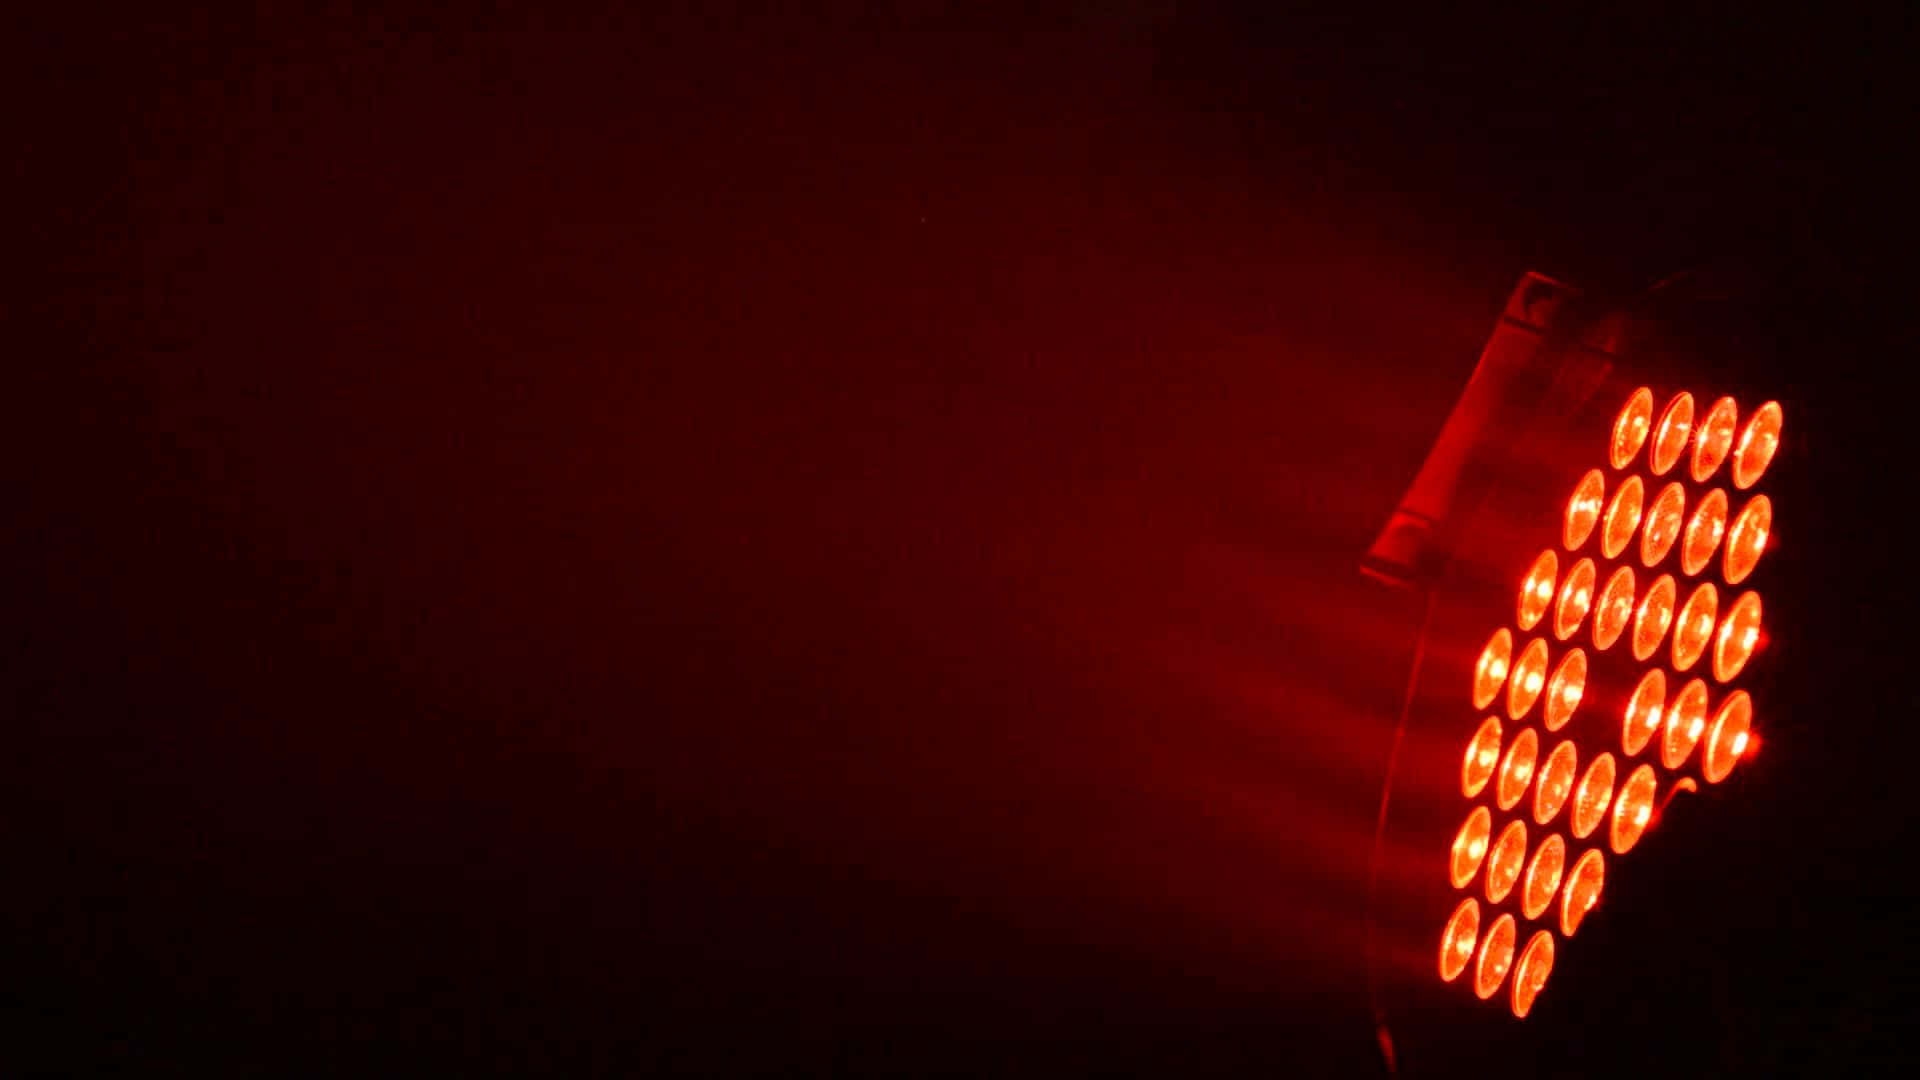 “High Tech Technology with Red LED” Wallpaper